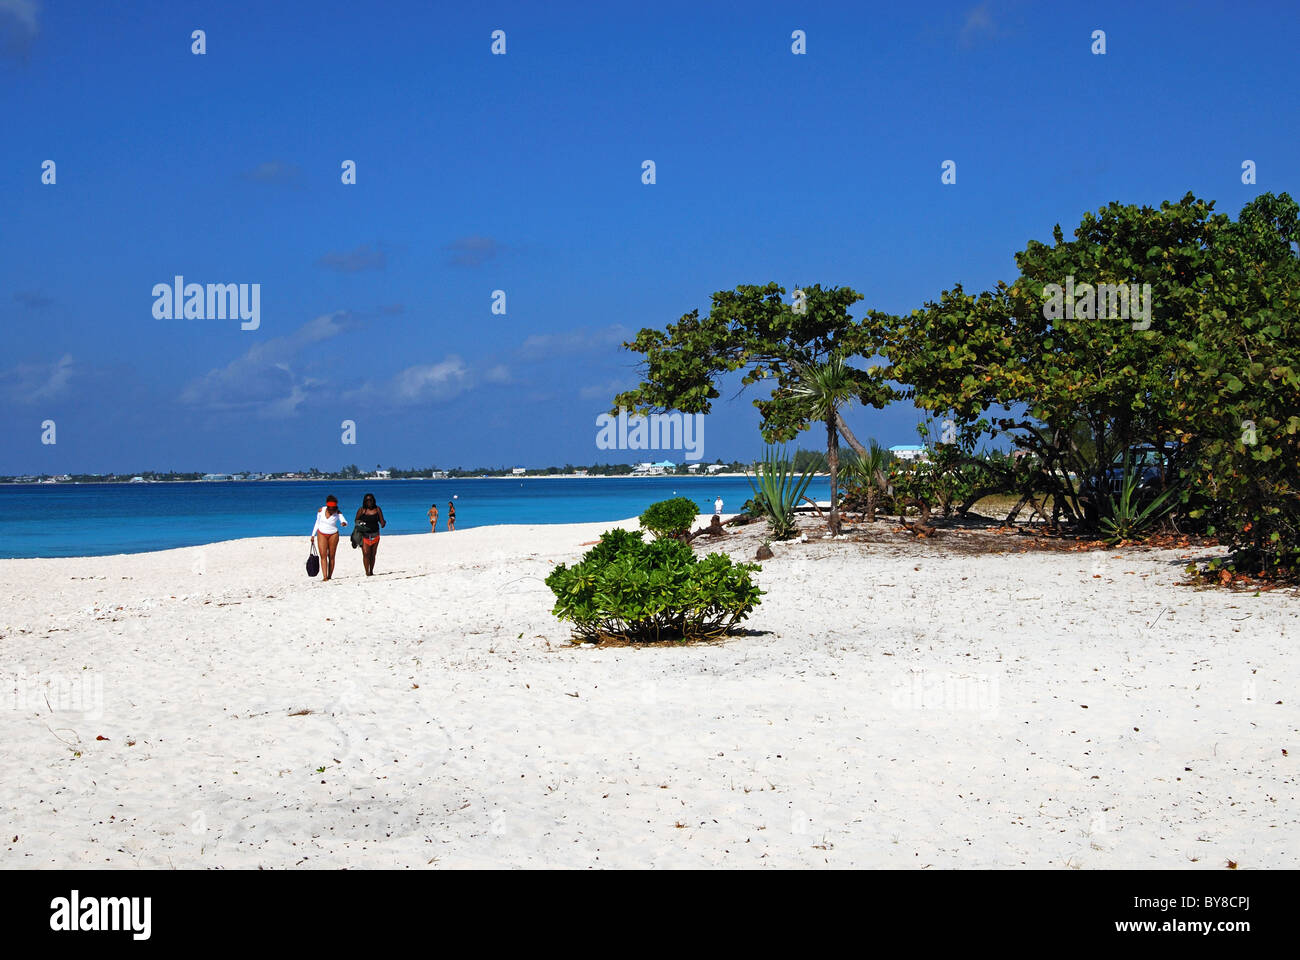 View of the beach, George Town, Grand Cayman, Cayman Islands, Caribbean. Stock Photo